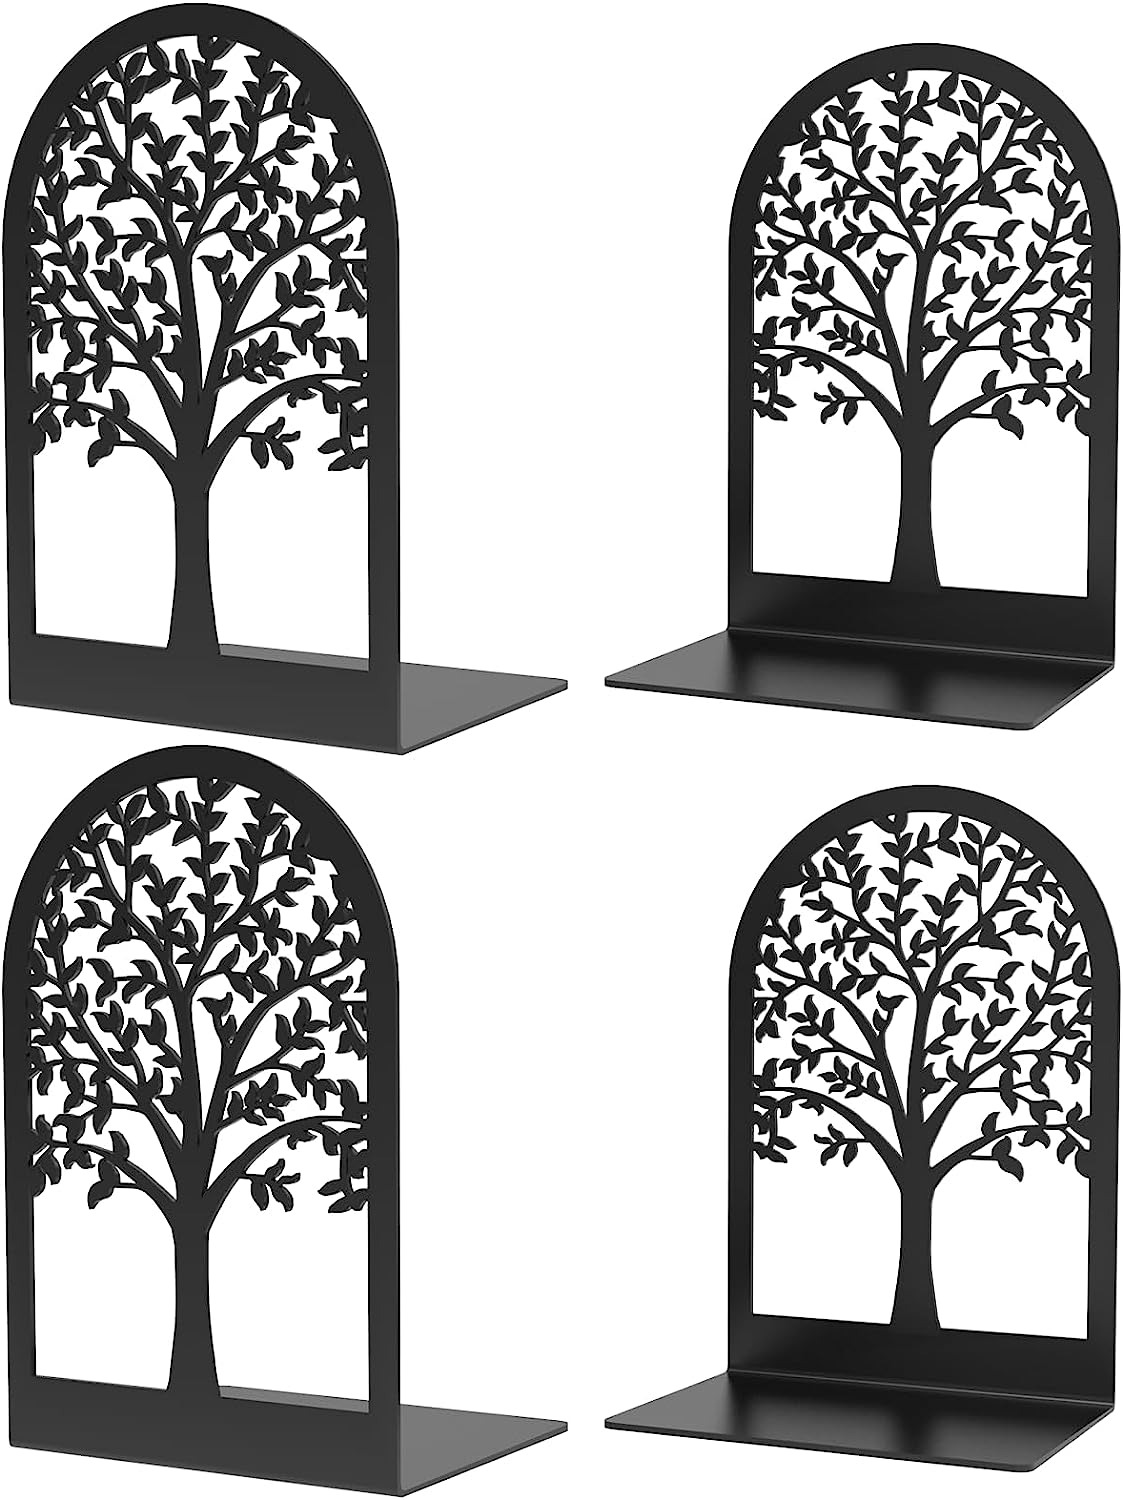 Book Ends, Bookends, Tree Book Ends for Shelves, Modern Book Ends Decorative